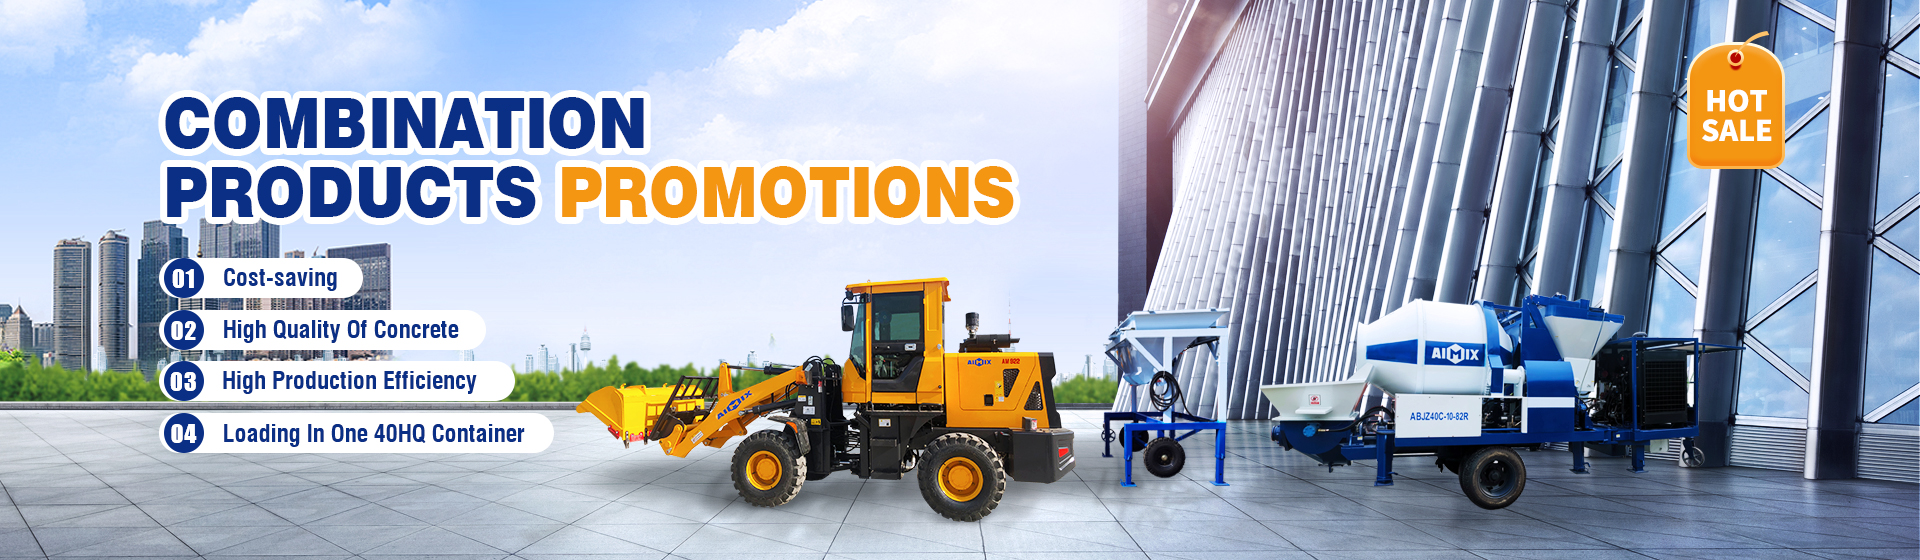 combination products promotions